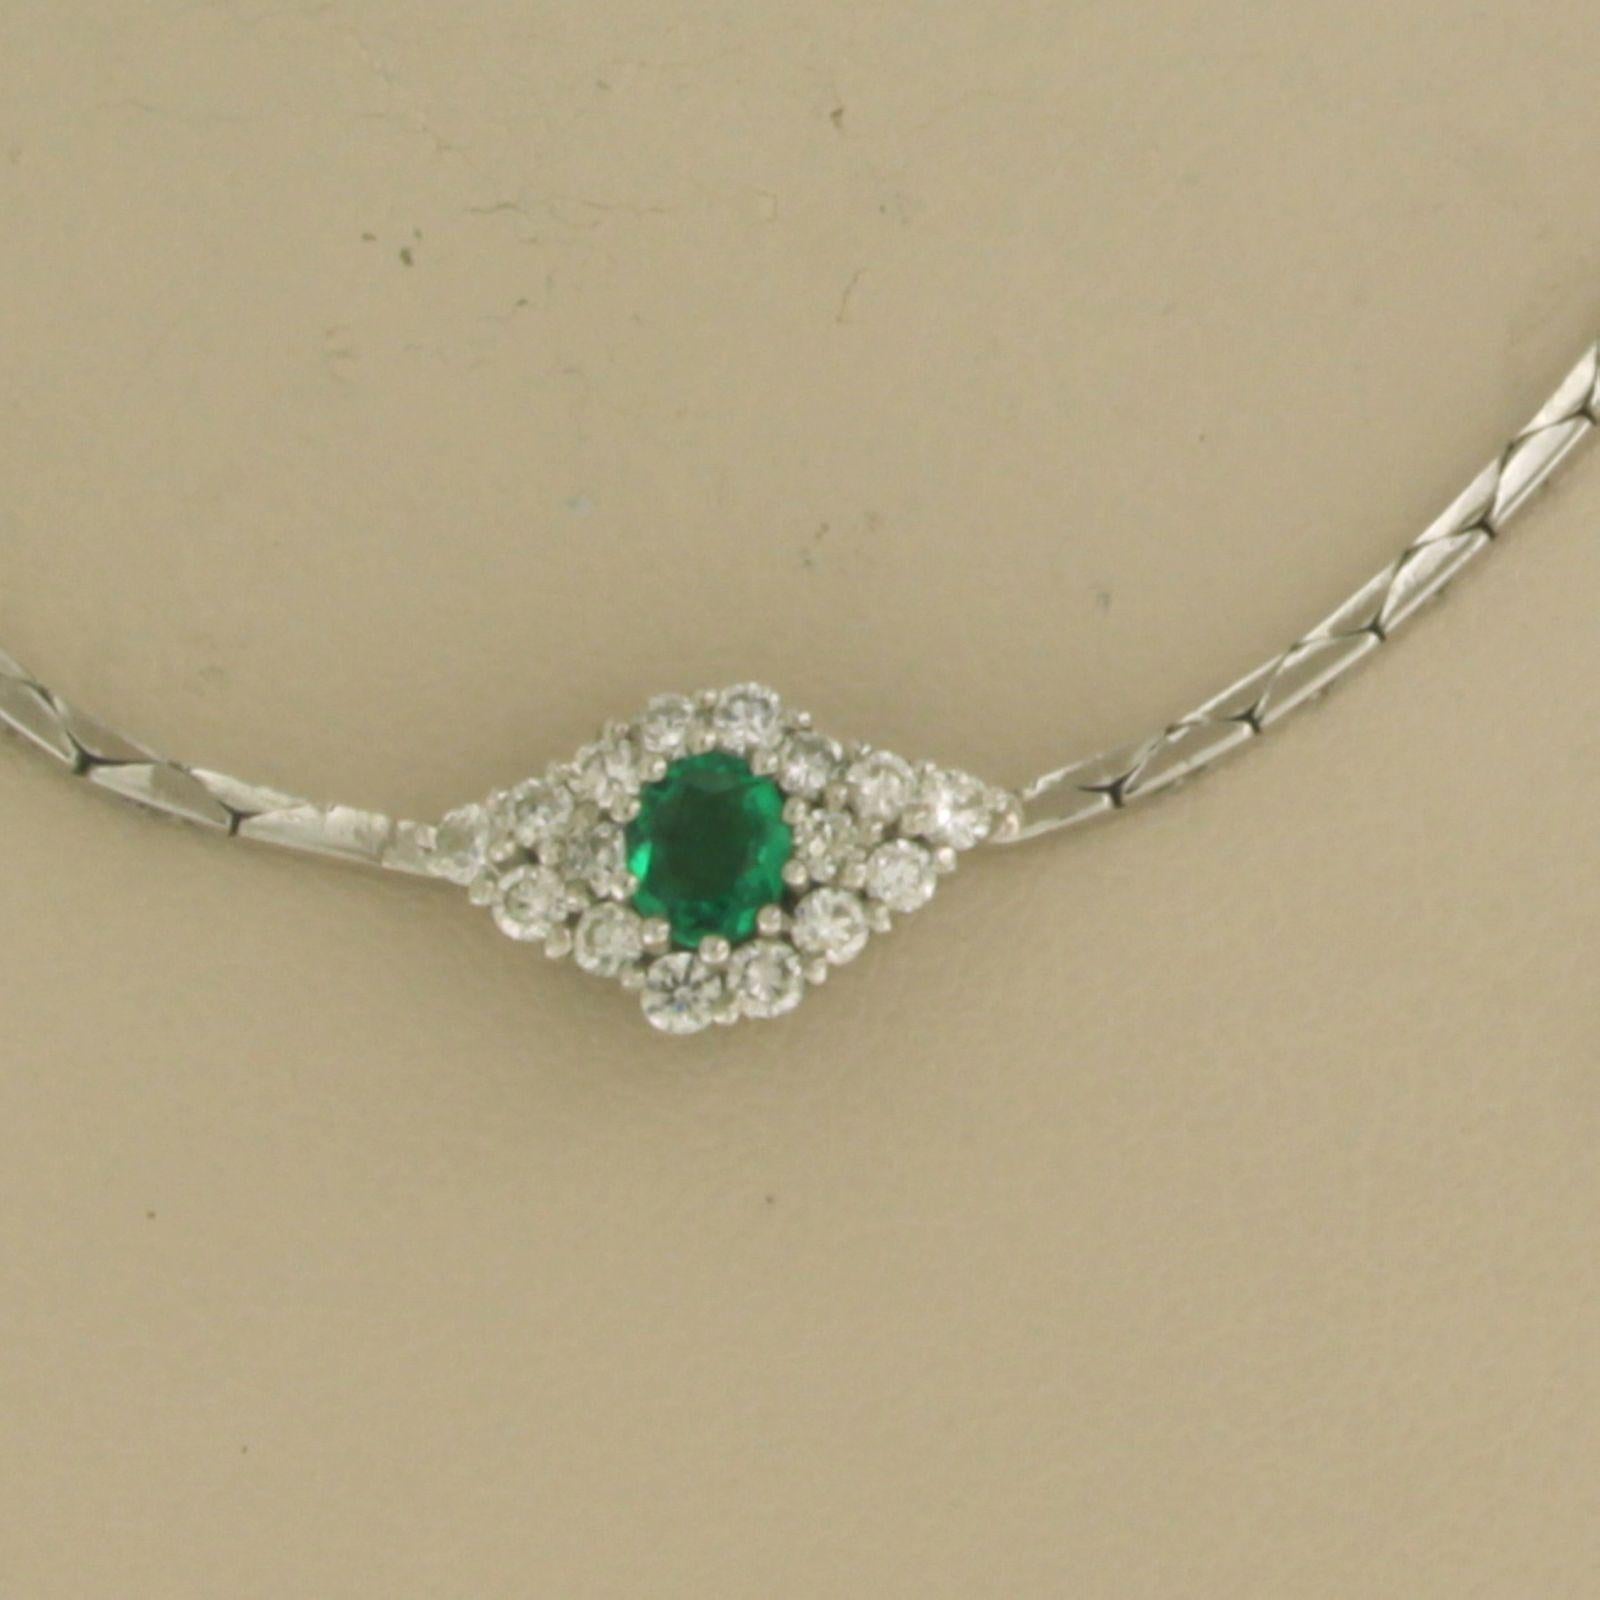 18k white gold necklace set with emerald to. 0.40ct and brilliant cut diamond 0.40ct - F/G - VS/SI - 40 cm long

Detailed description

the length of the necklace is 40 cm long by 1.3 mm wide

dimensions of the center piece are 1.3 cm wide by 8.2 mm